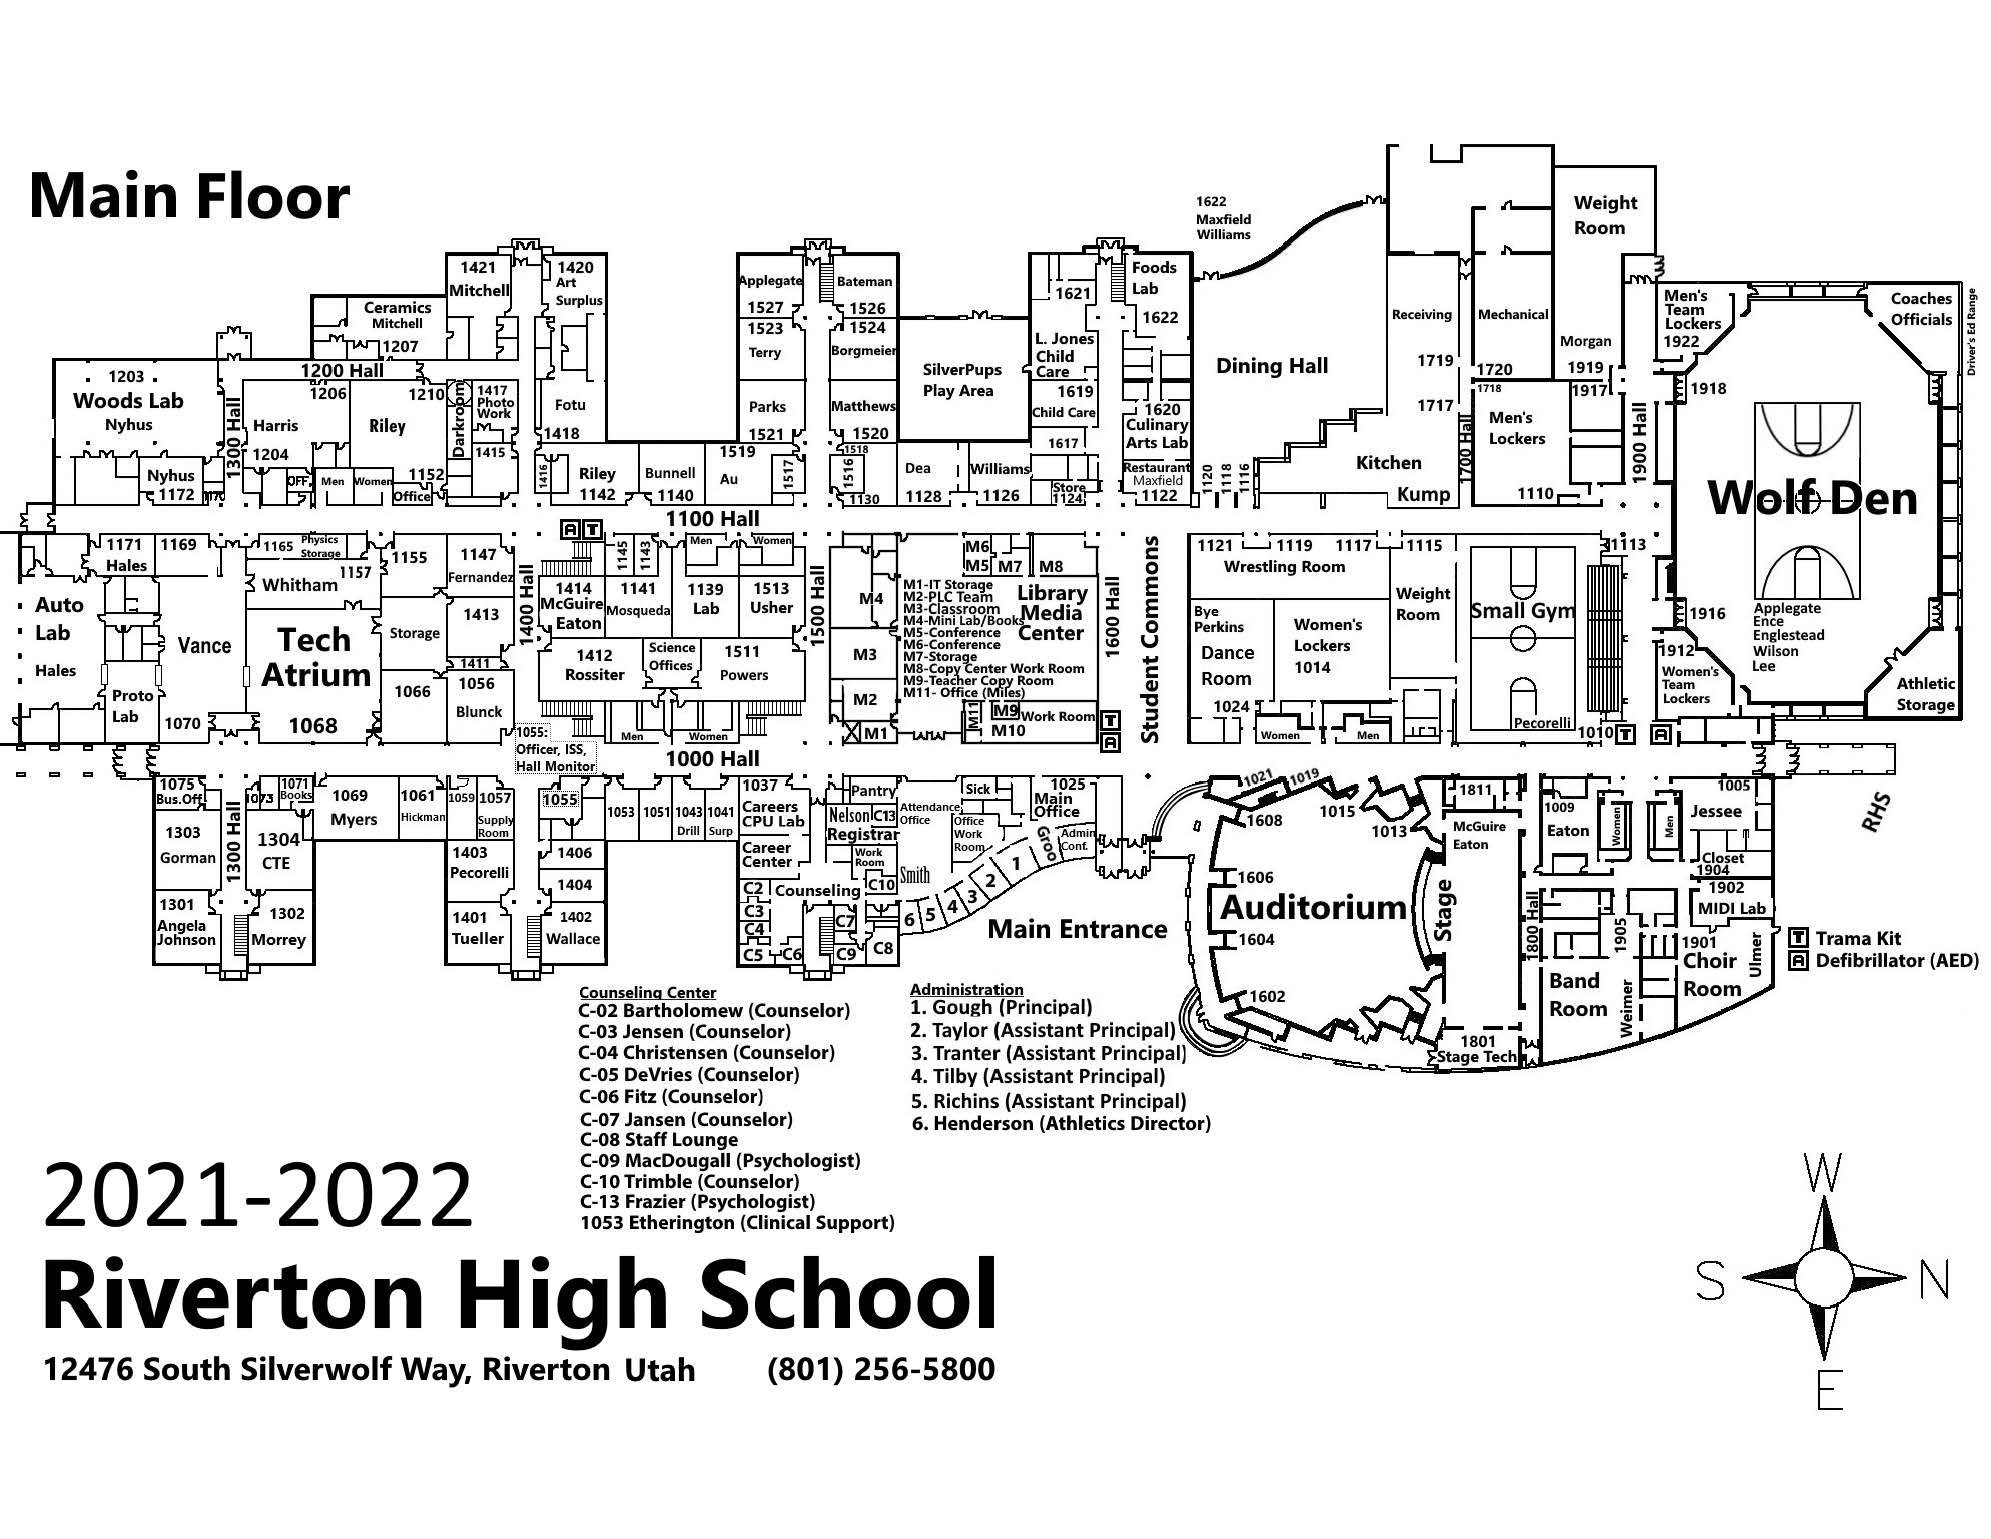 Picture of the Map of the Bottom Floor of RHS